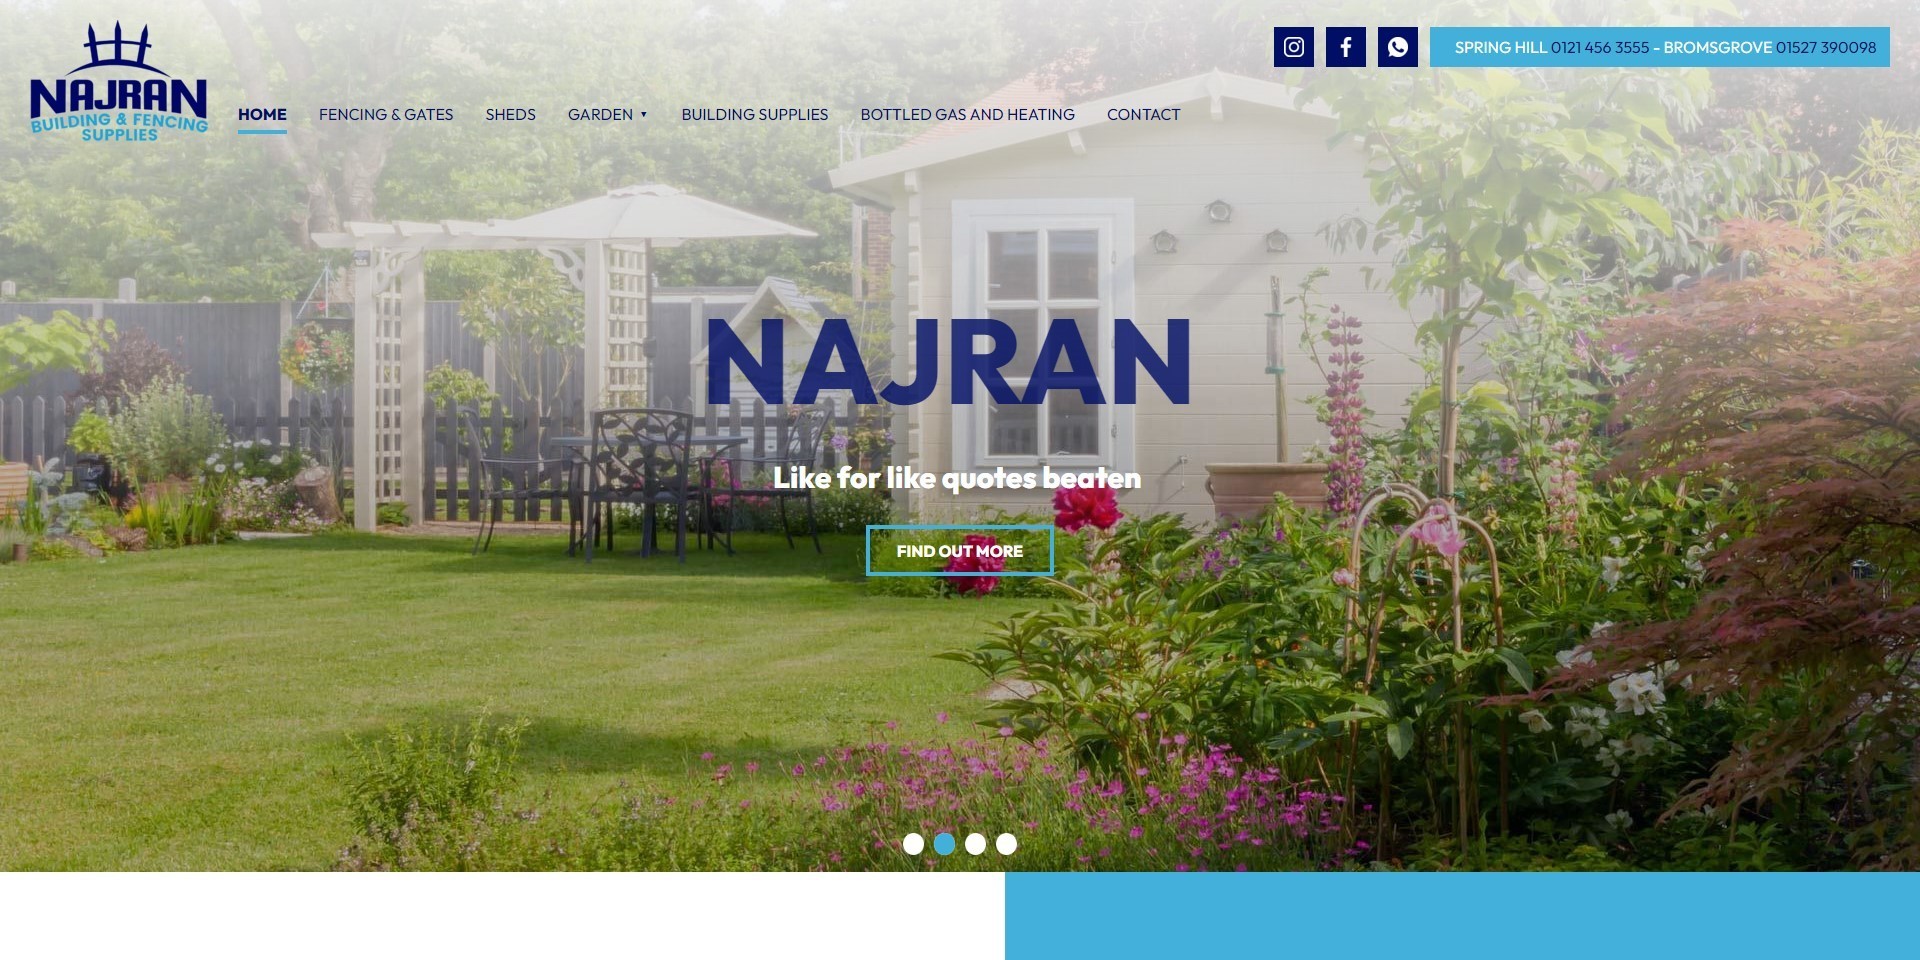 A brand new, modern and responsive website design for Najran the building and fencing company